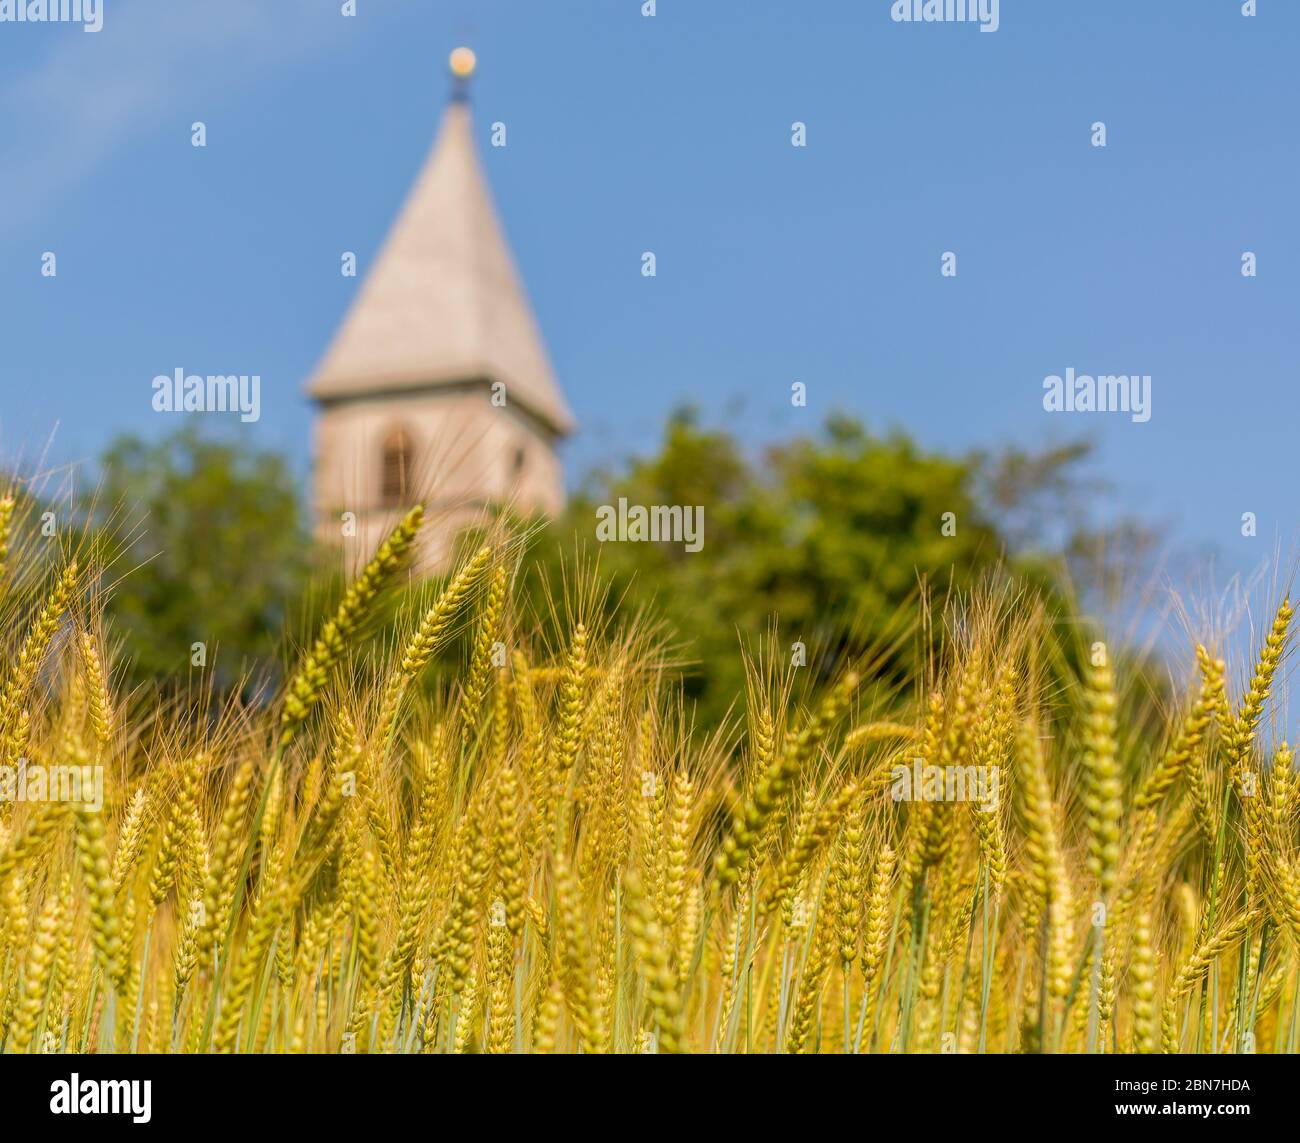 Ripe ears / spikelets in barley field (Hordeum vulgare) in summer. South Tyrol Village Favogna di sotto, Trentino Alto Adige, Bolzano province, Italy Stock Photo